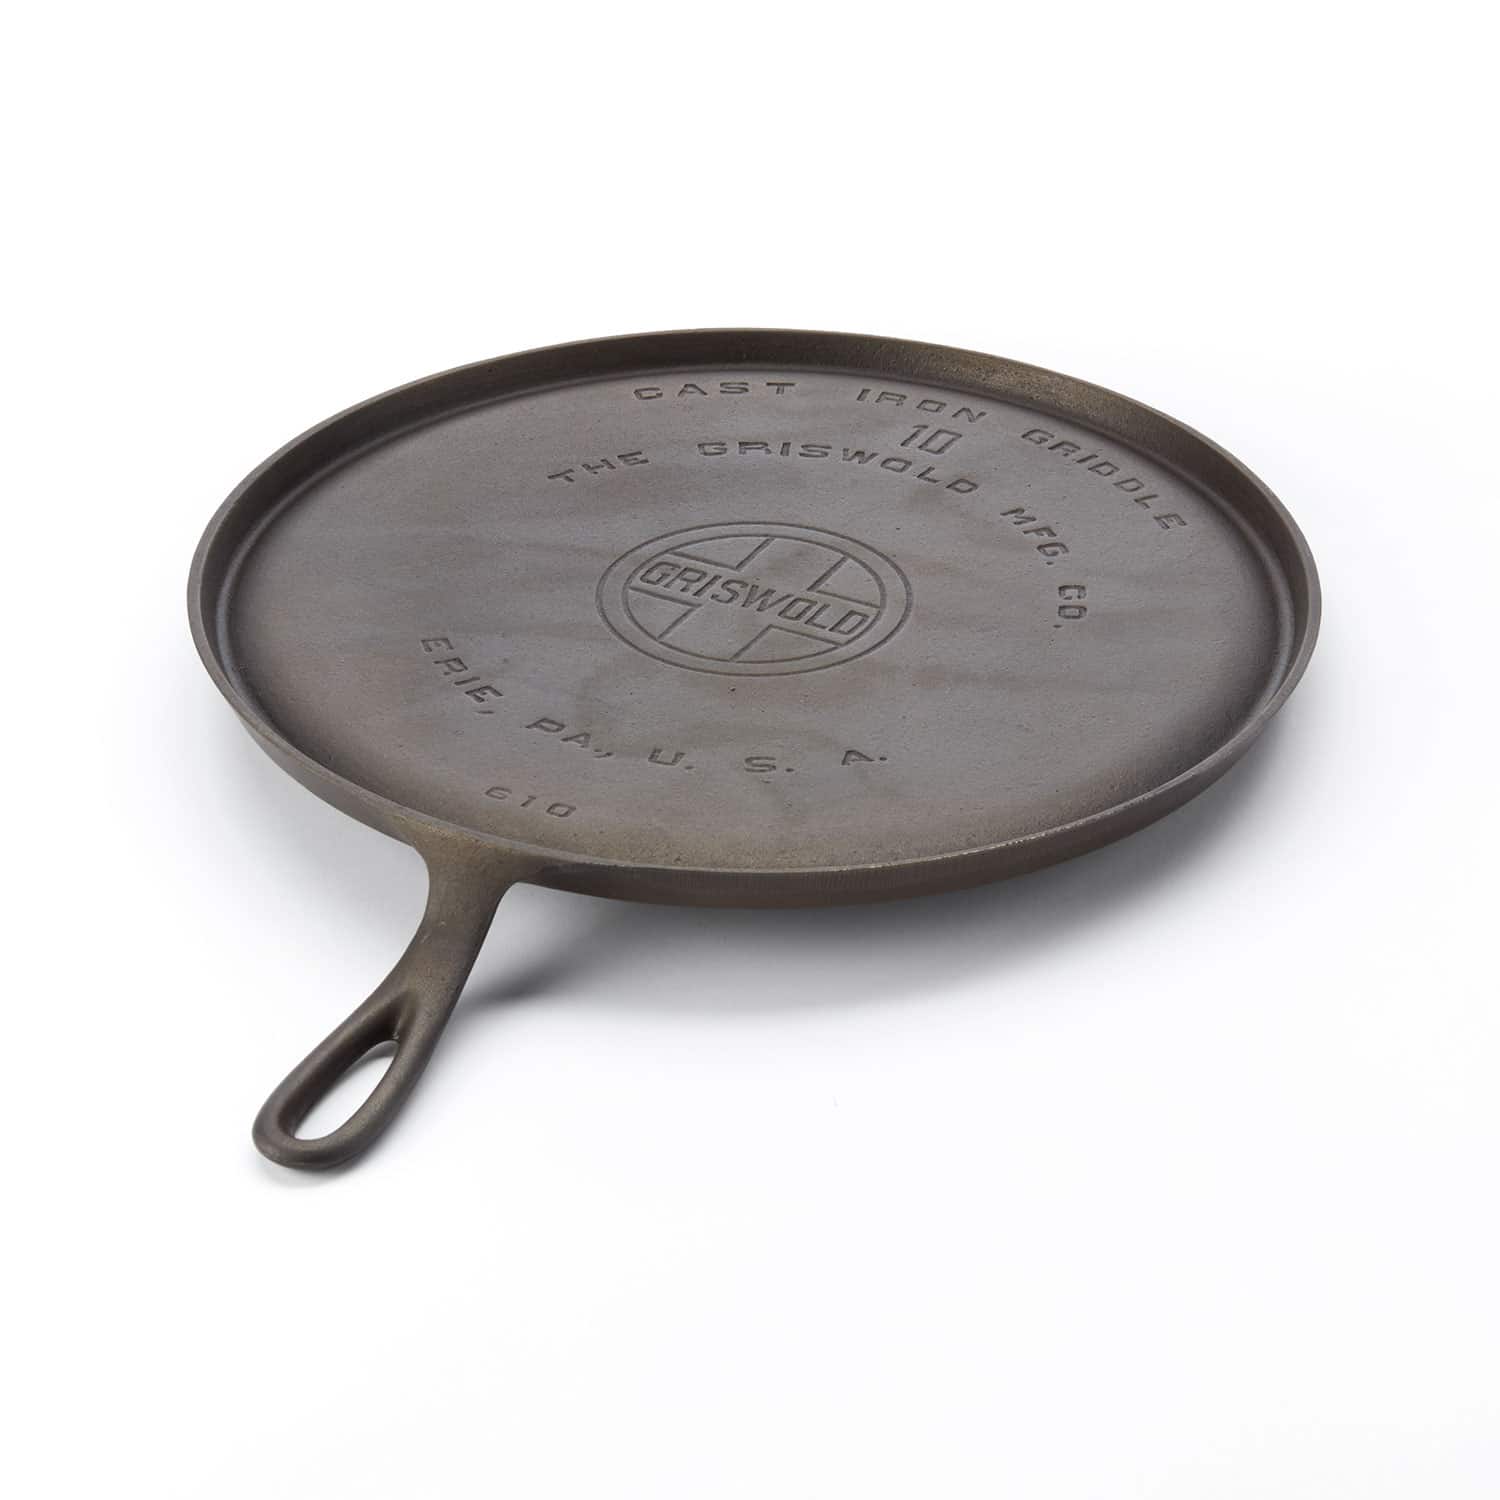 Cast Iron A (Vintage Griswold Size 10 Griddle)  Rental for Photography at  Noho Surface and Prop